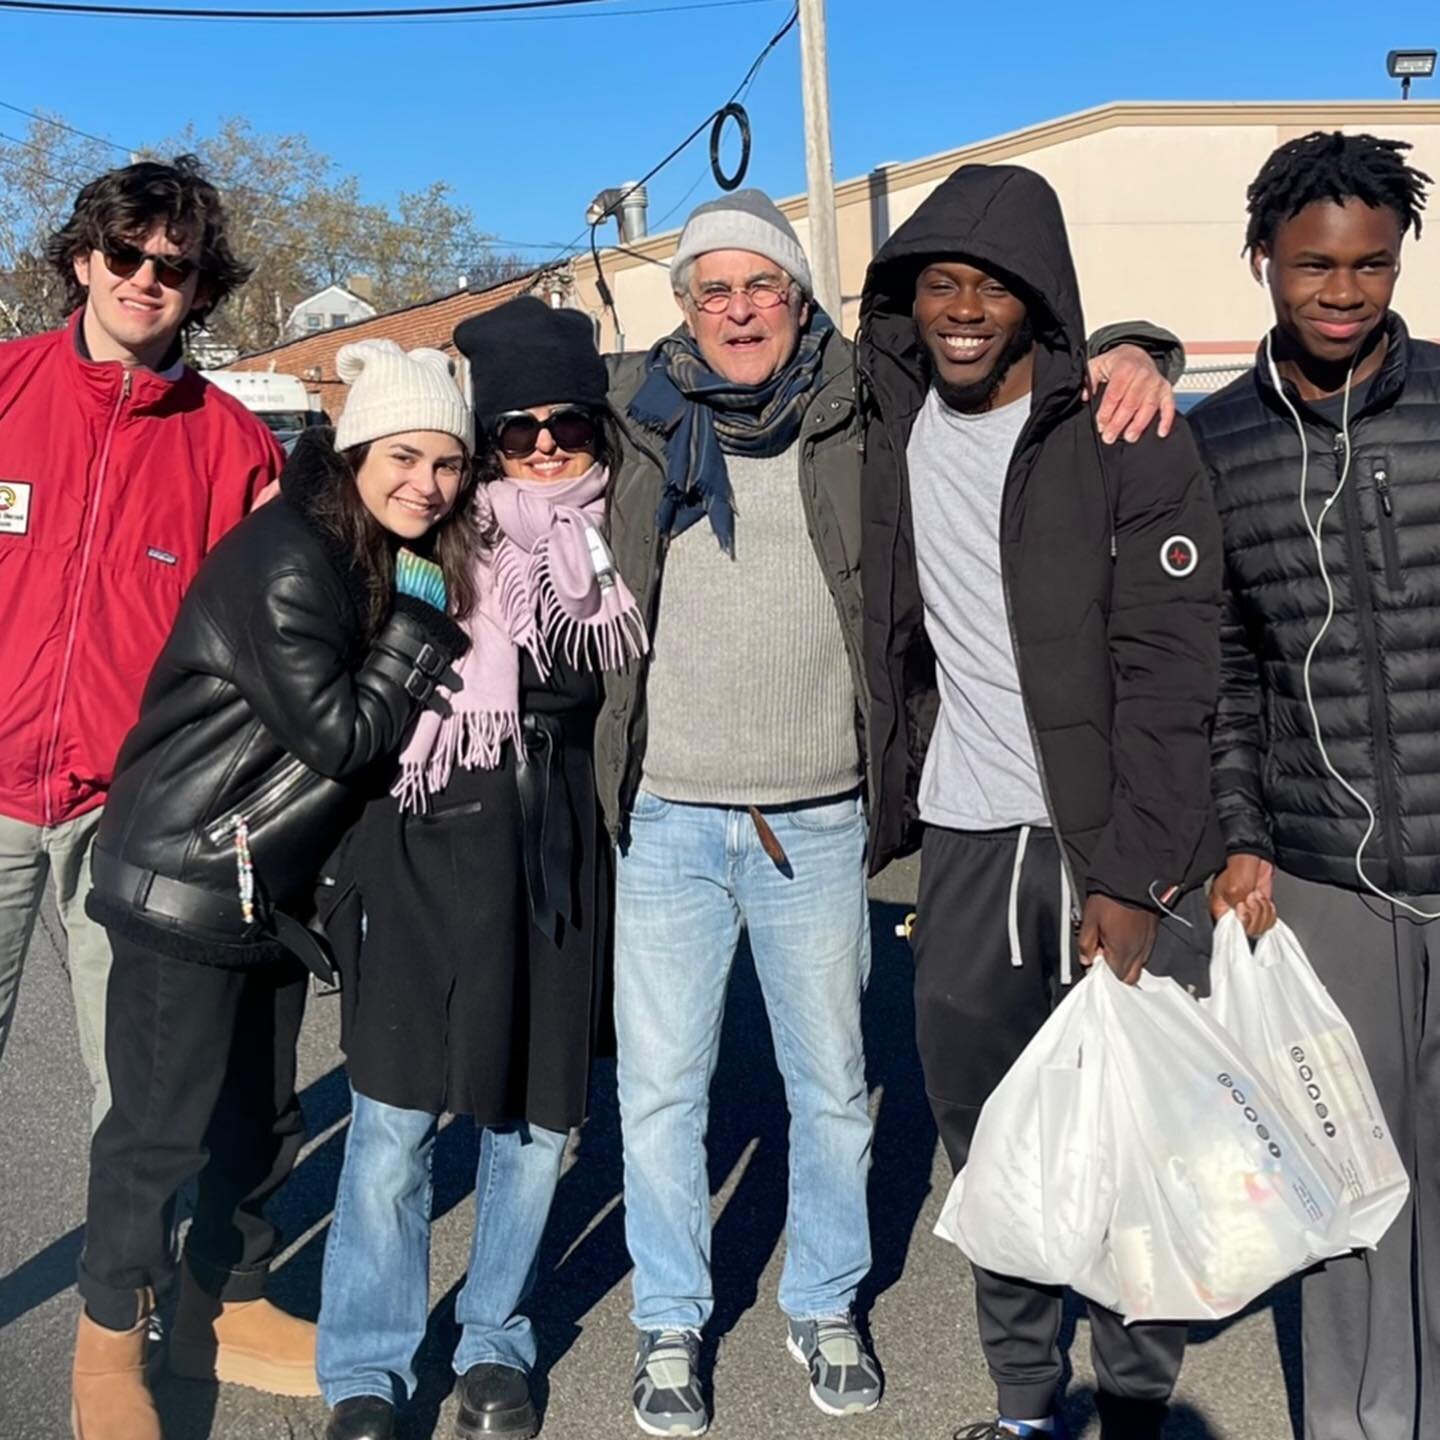 A wonderful morning  of Turkey and Thanksgiving meal distribution to 100 families in our school community.  Thank you to our volunteers and supporters for helping us provide Thanksgiving meals to so many families in the East Orange Community. Wishing